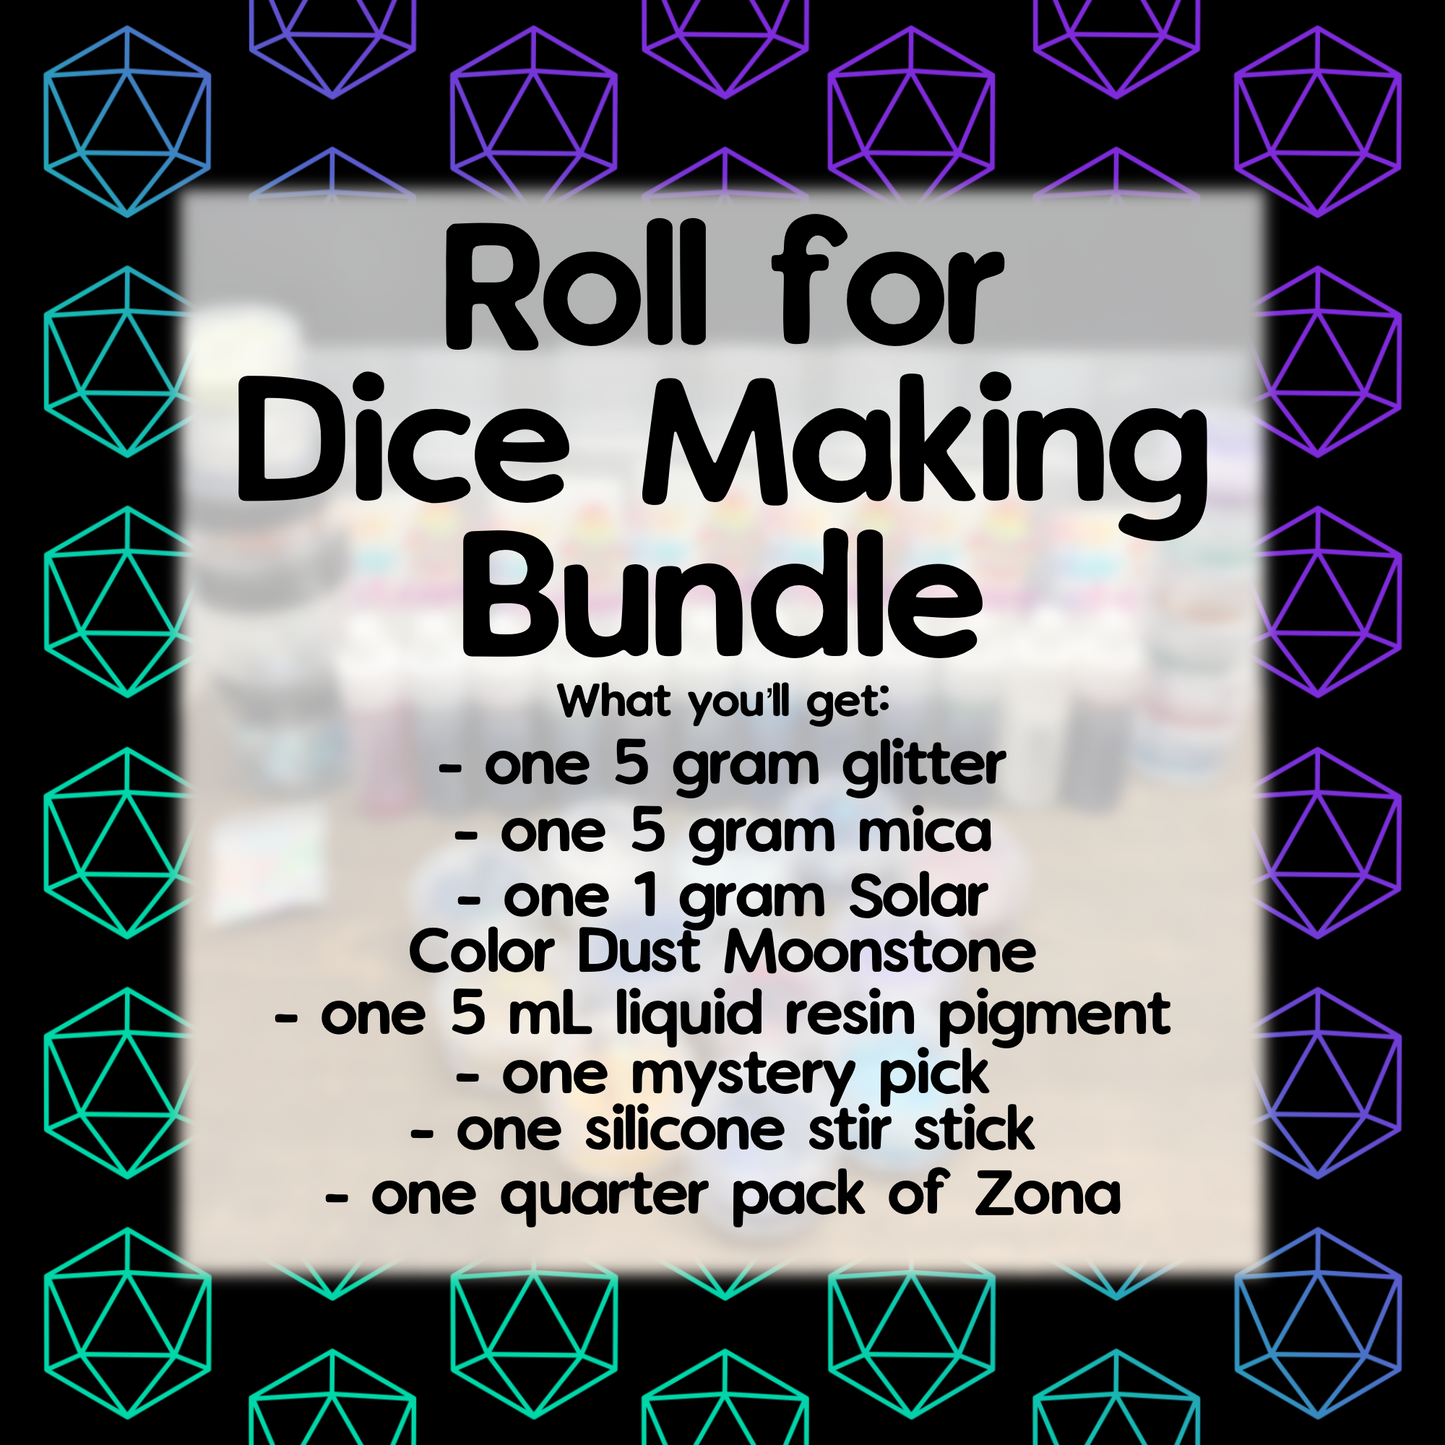 Roll for Dice Making Bundle